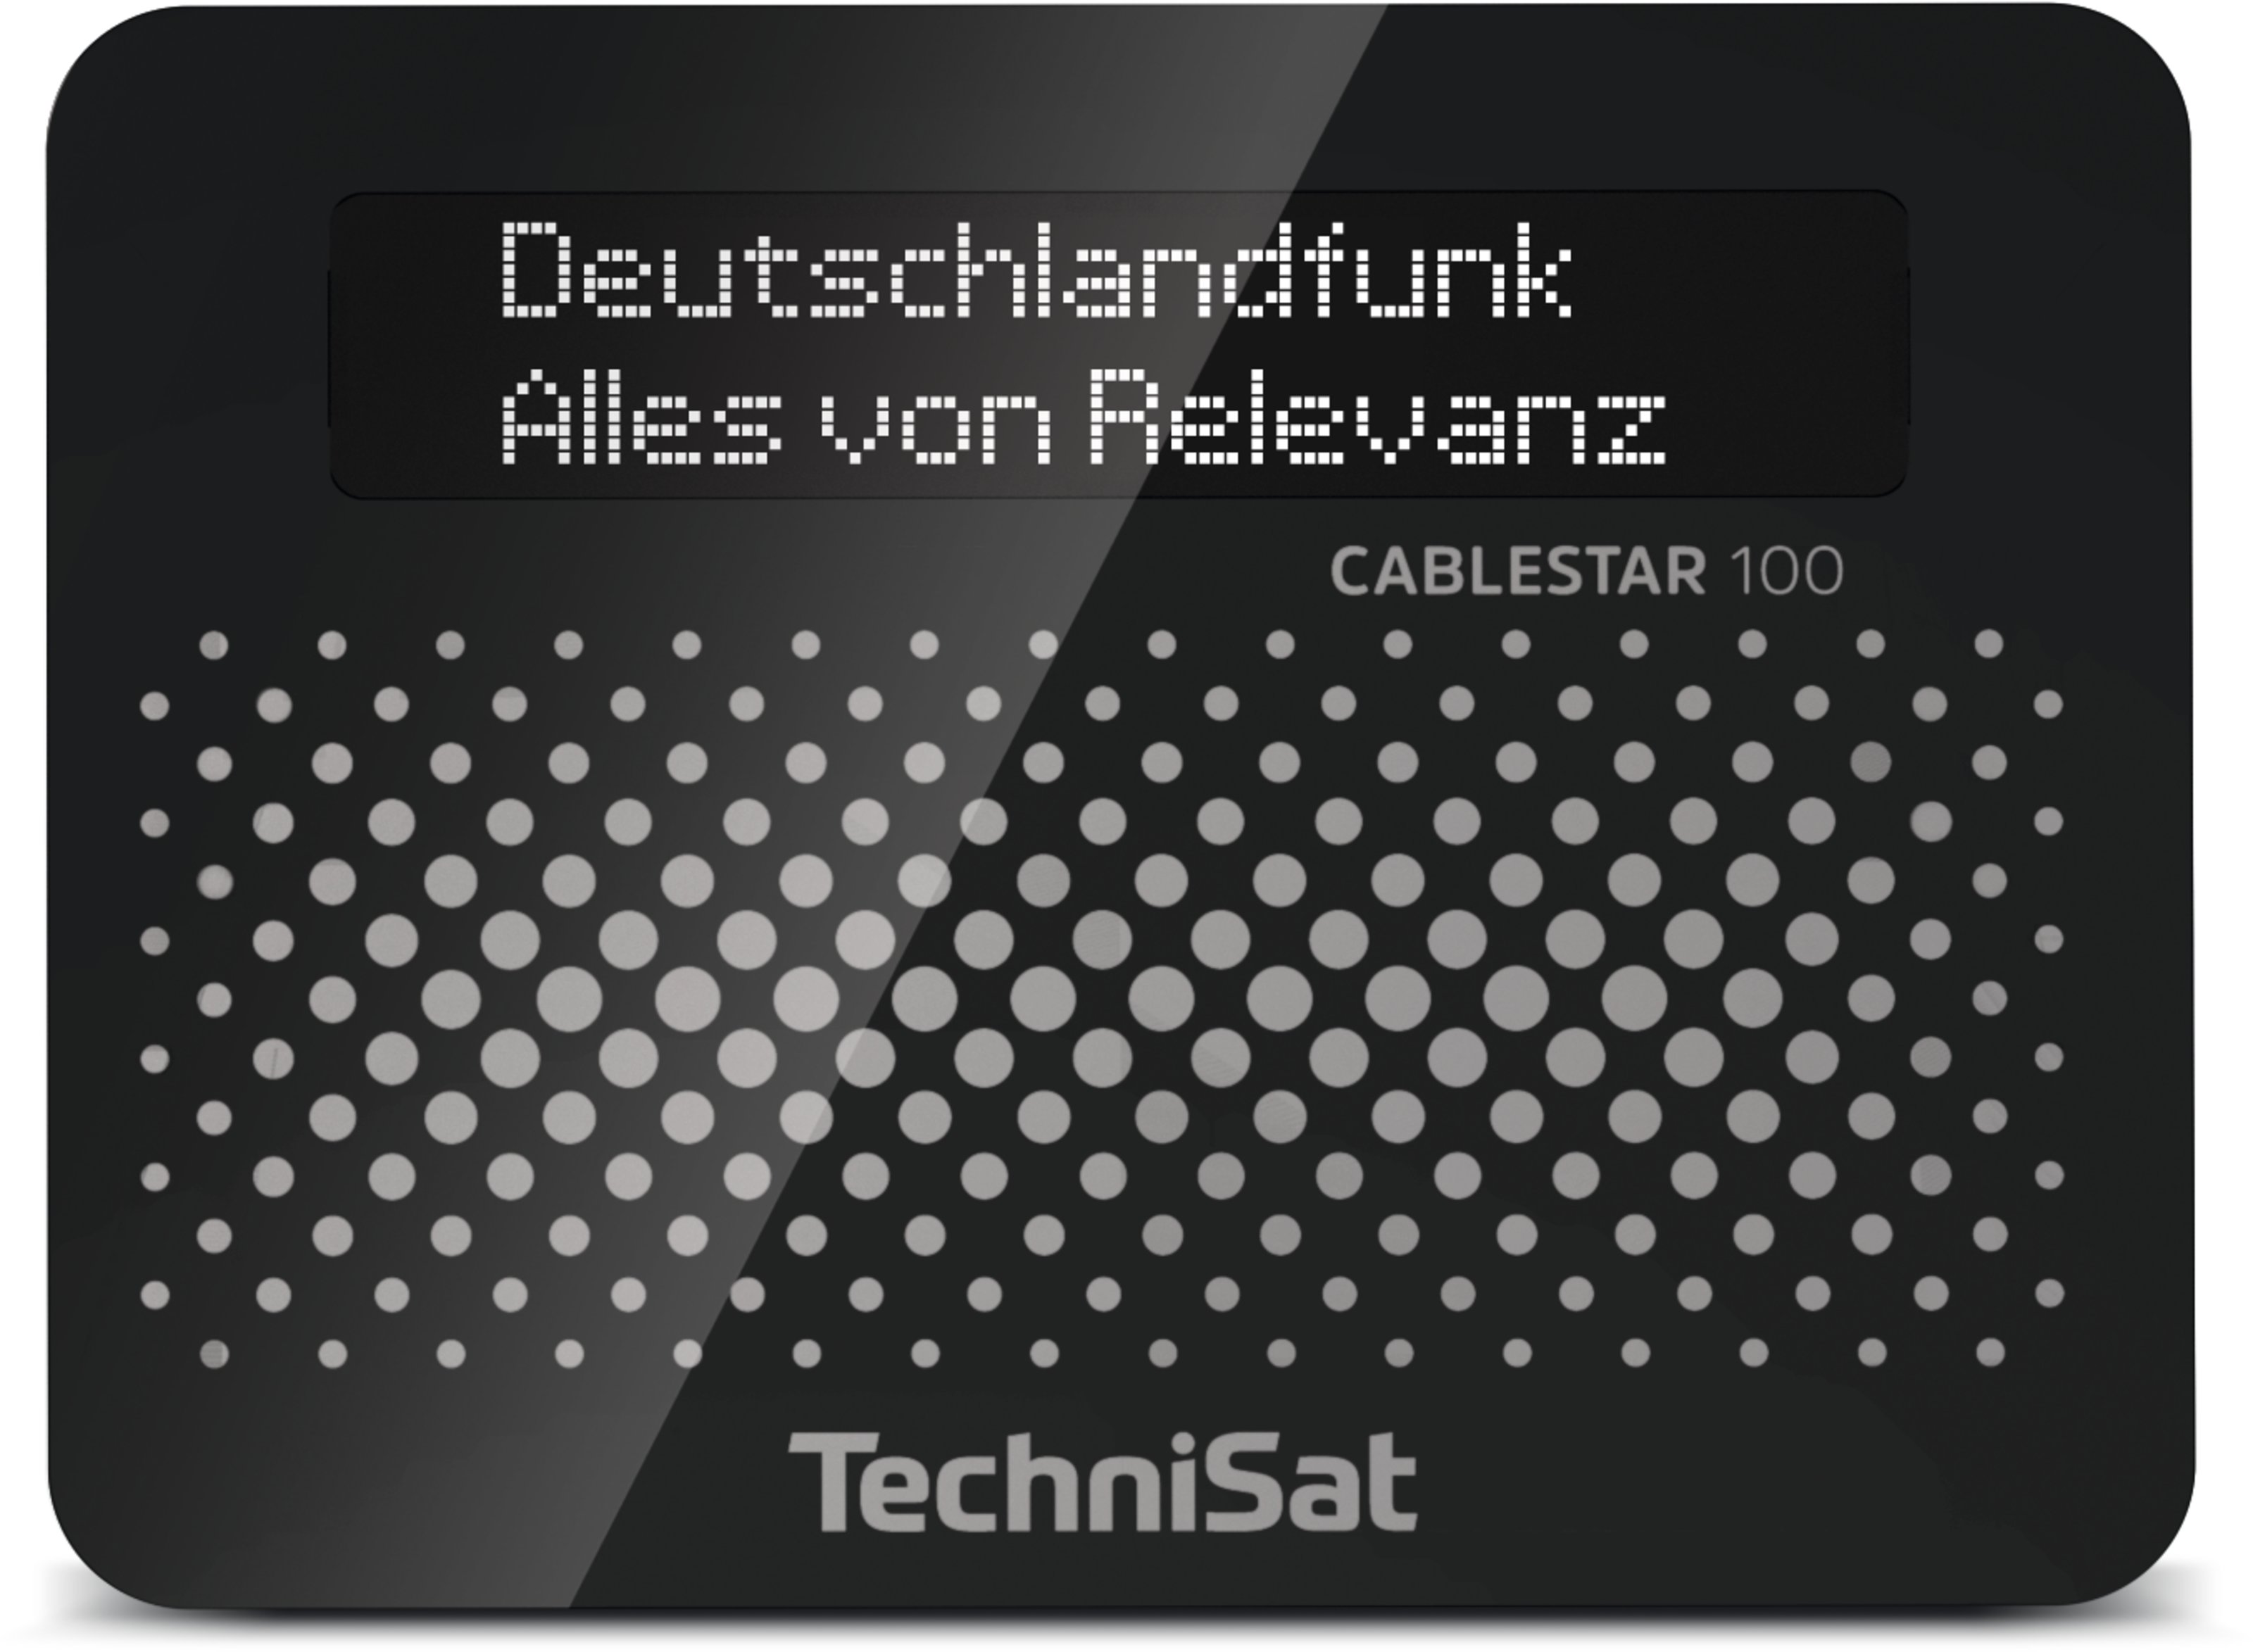 CABLESTAR 100 ohne AAC (C-Ware)